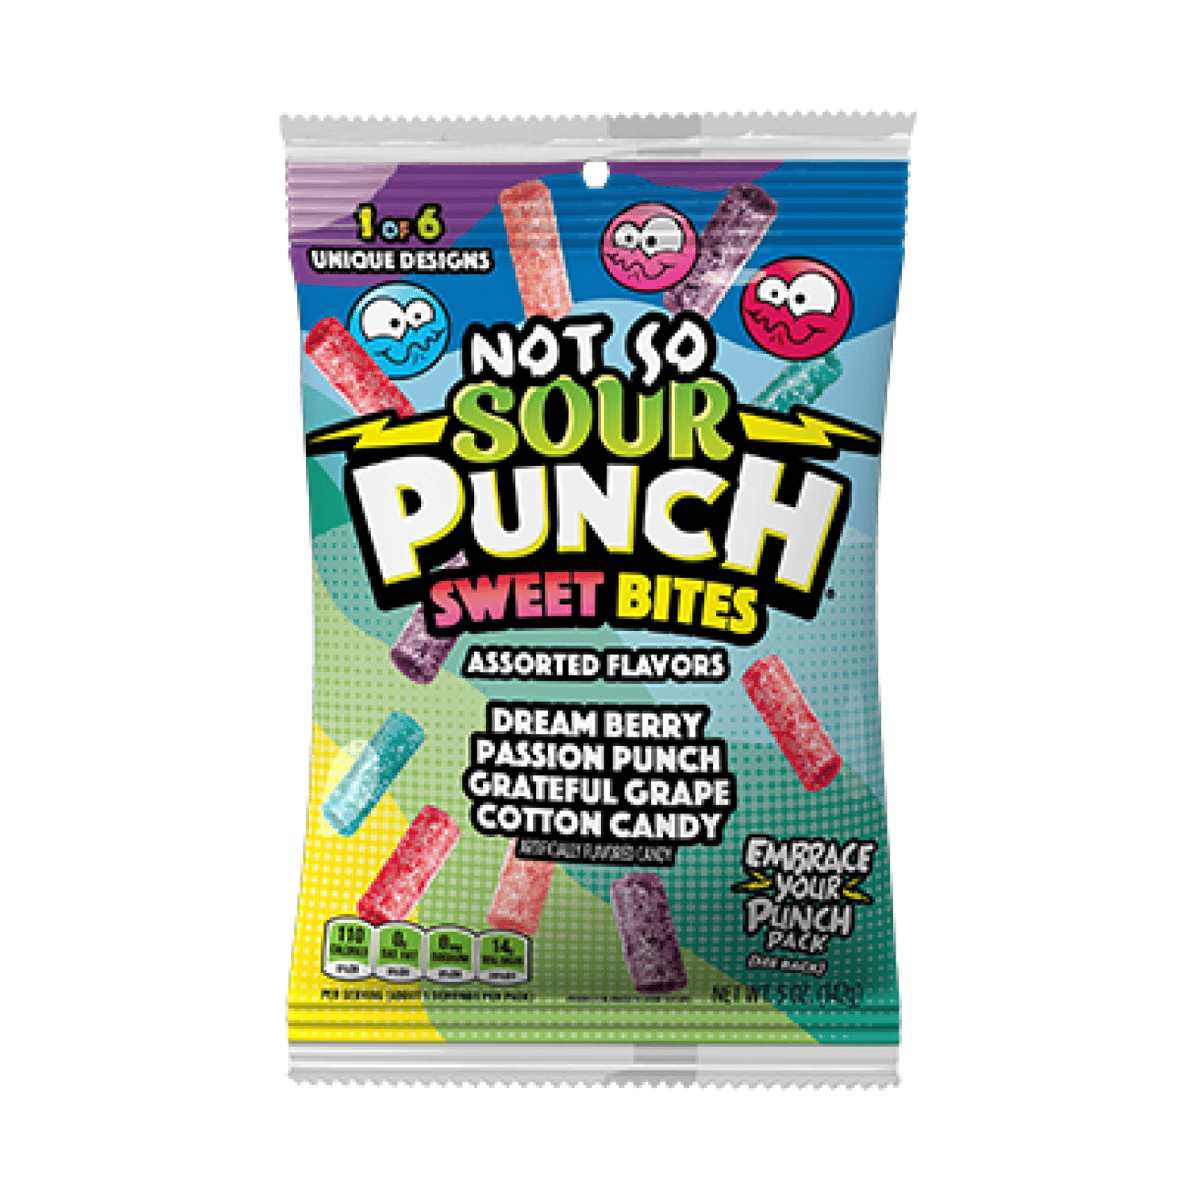 Skittles Cotton Candy  Candy Funhouse – Candy Funhouse US